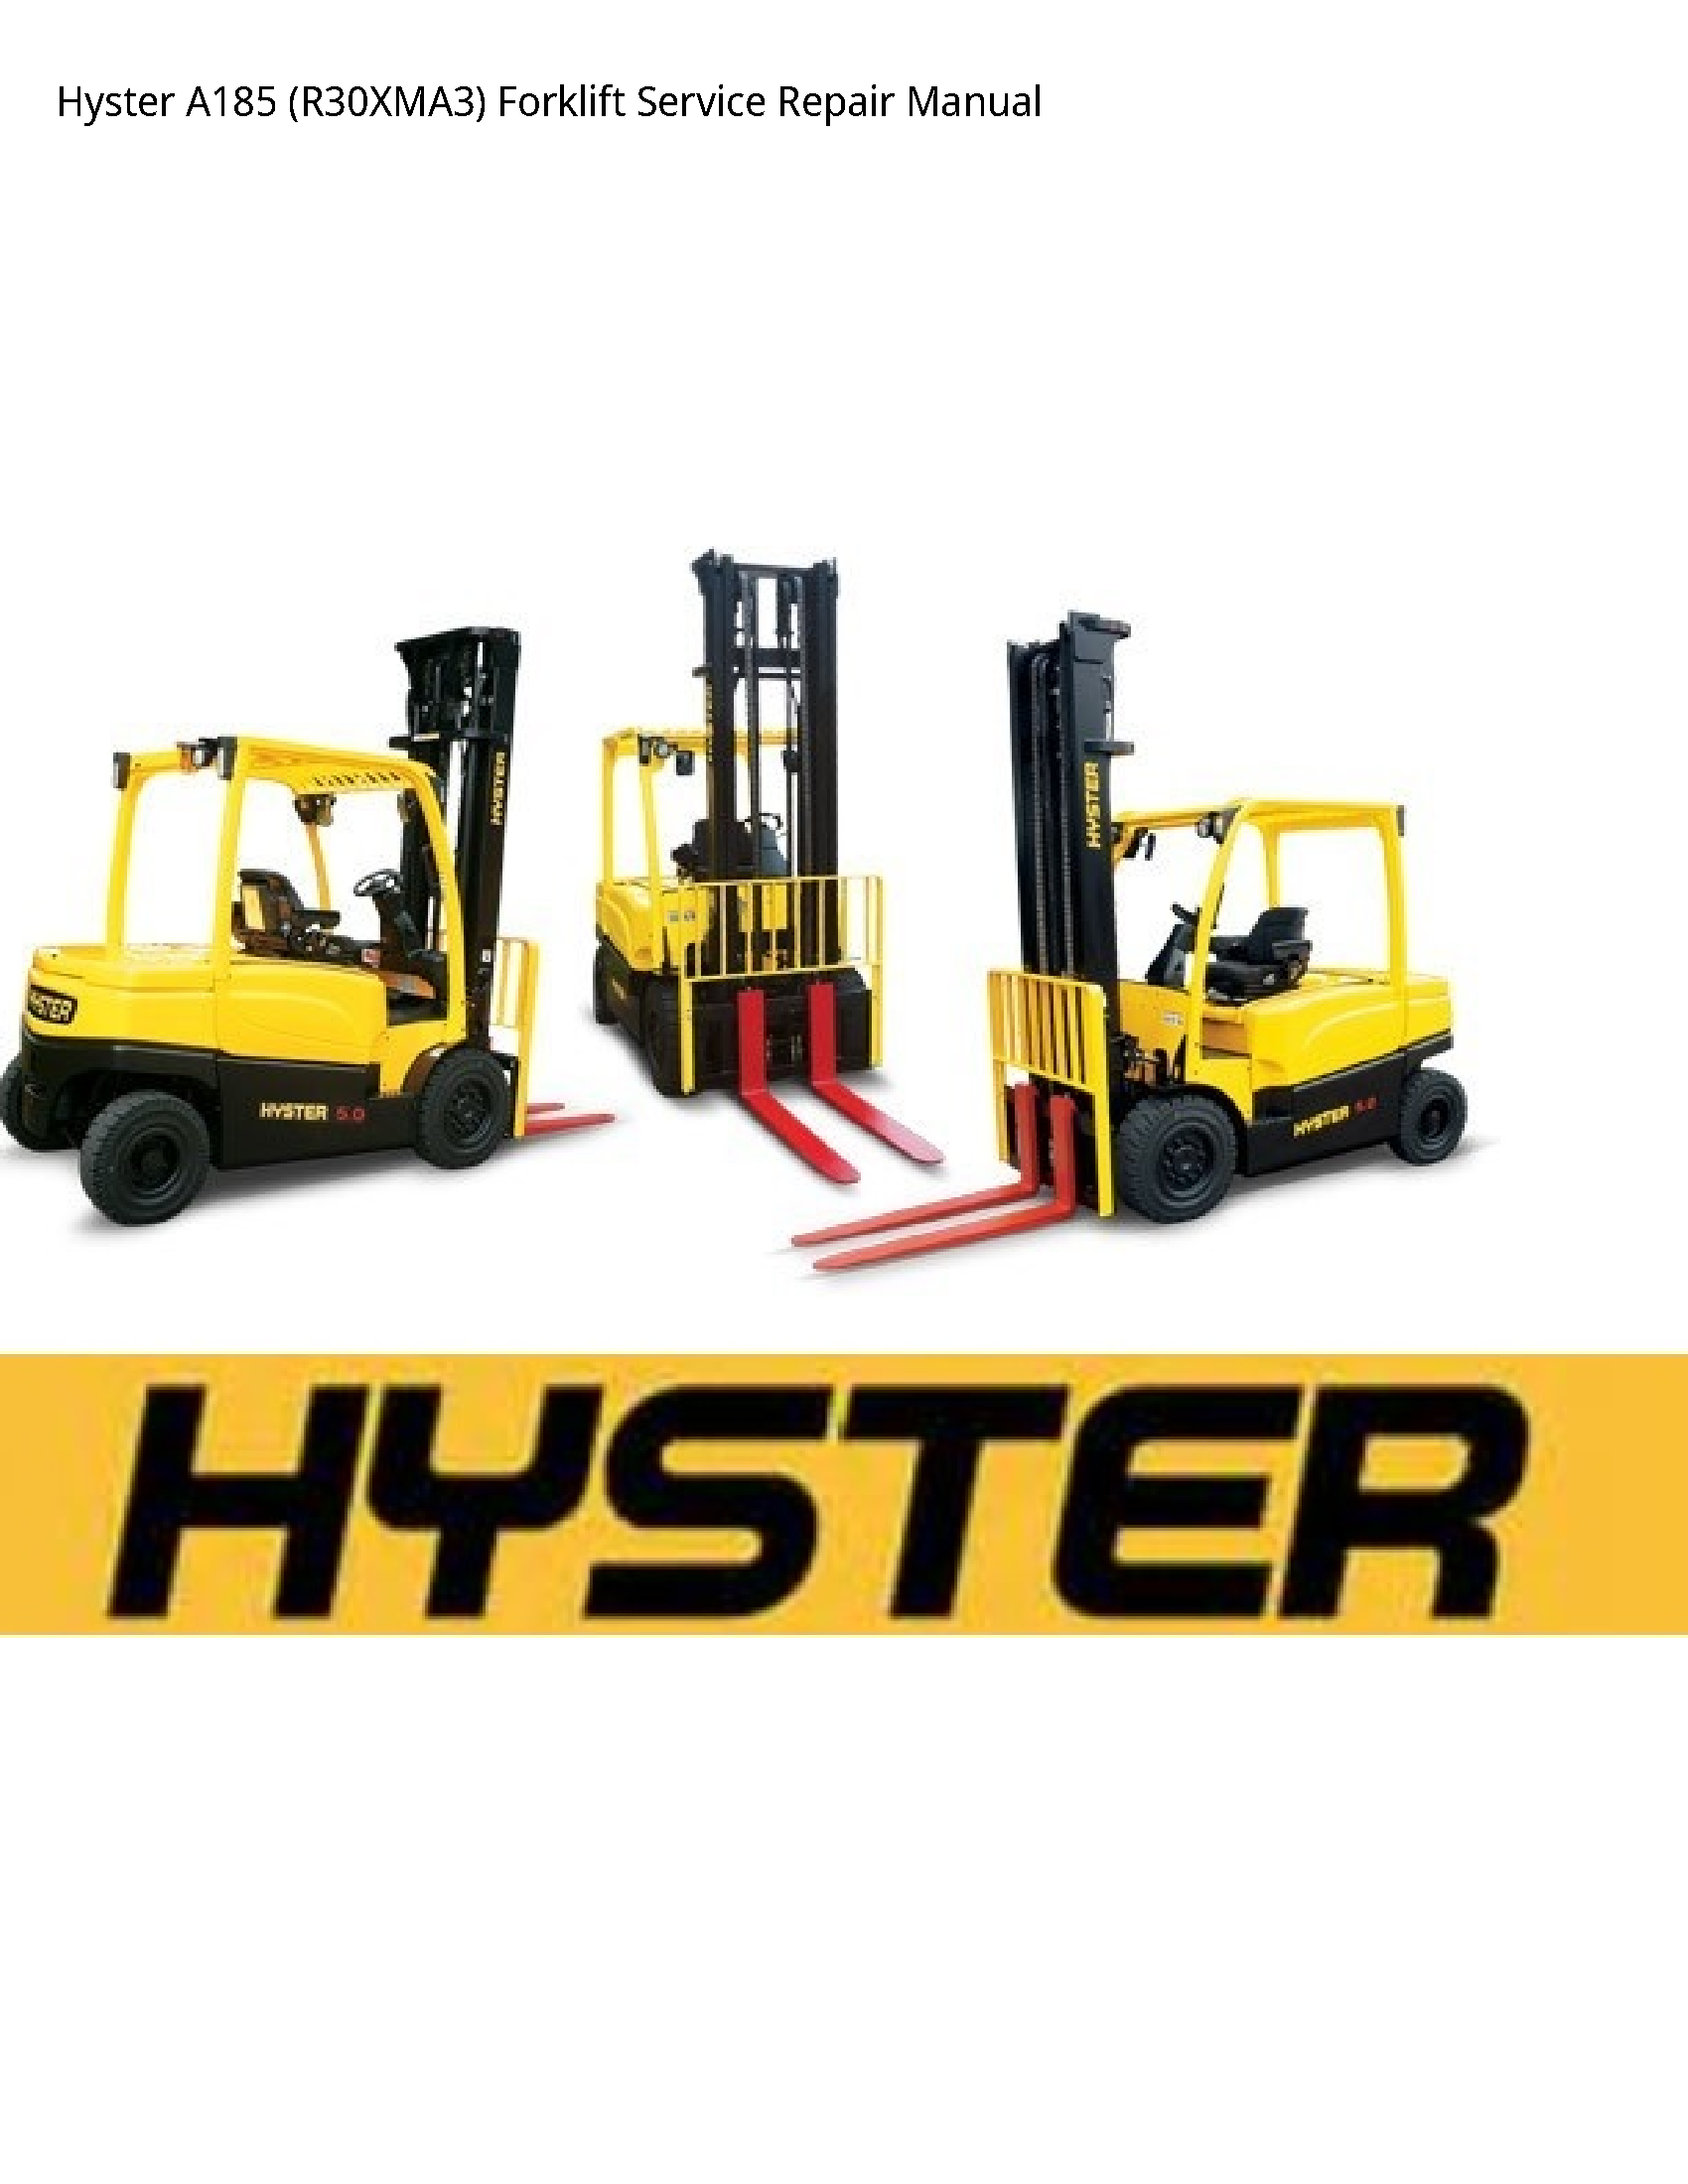 Hyster A185 Forklift manual